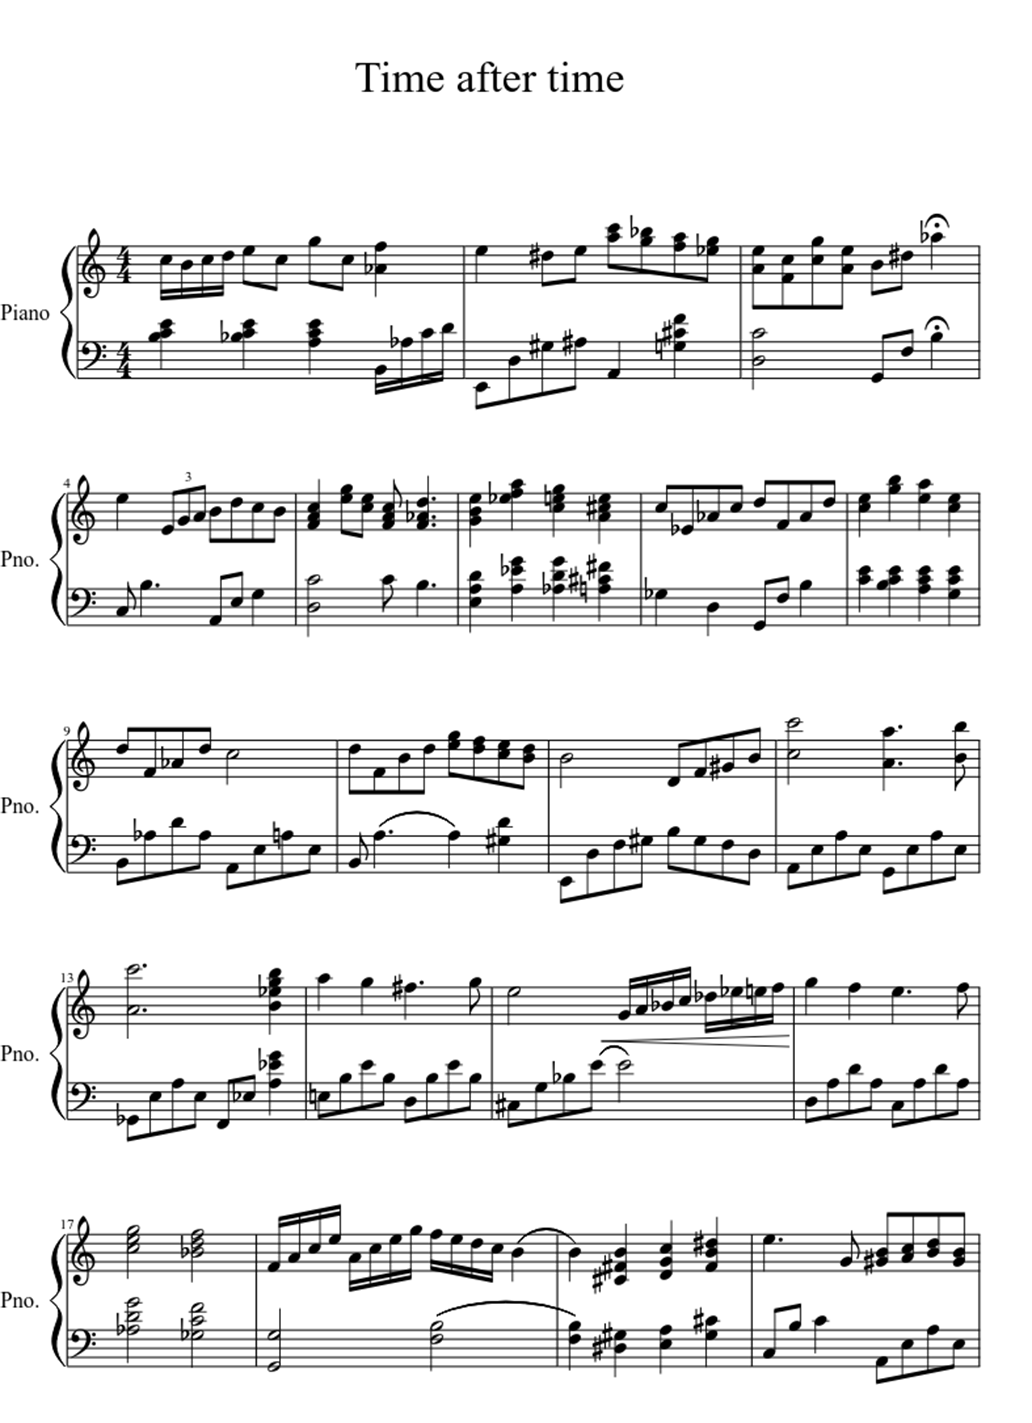 Time after time sheet music notes 1